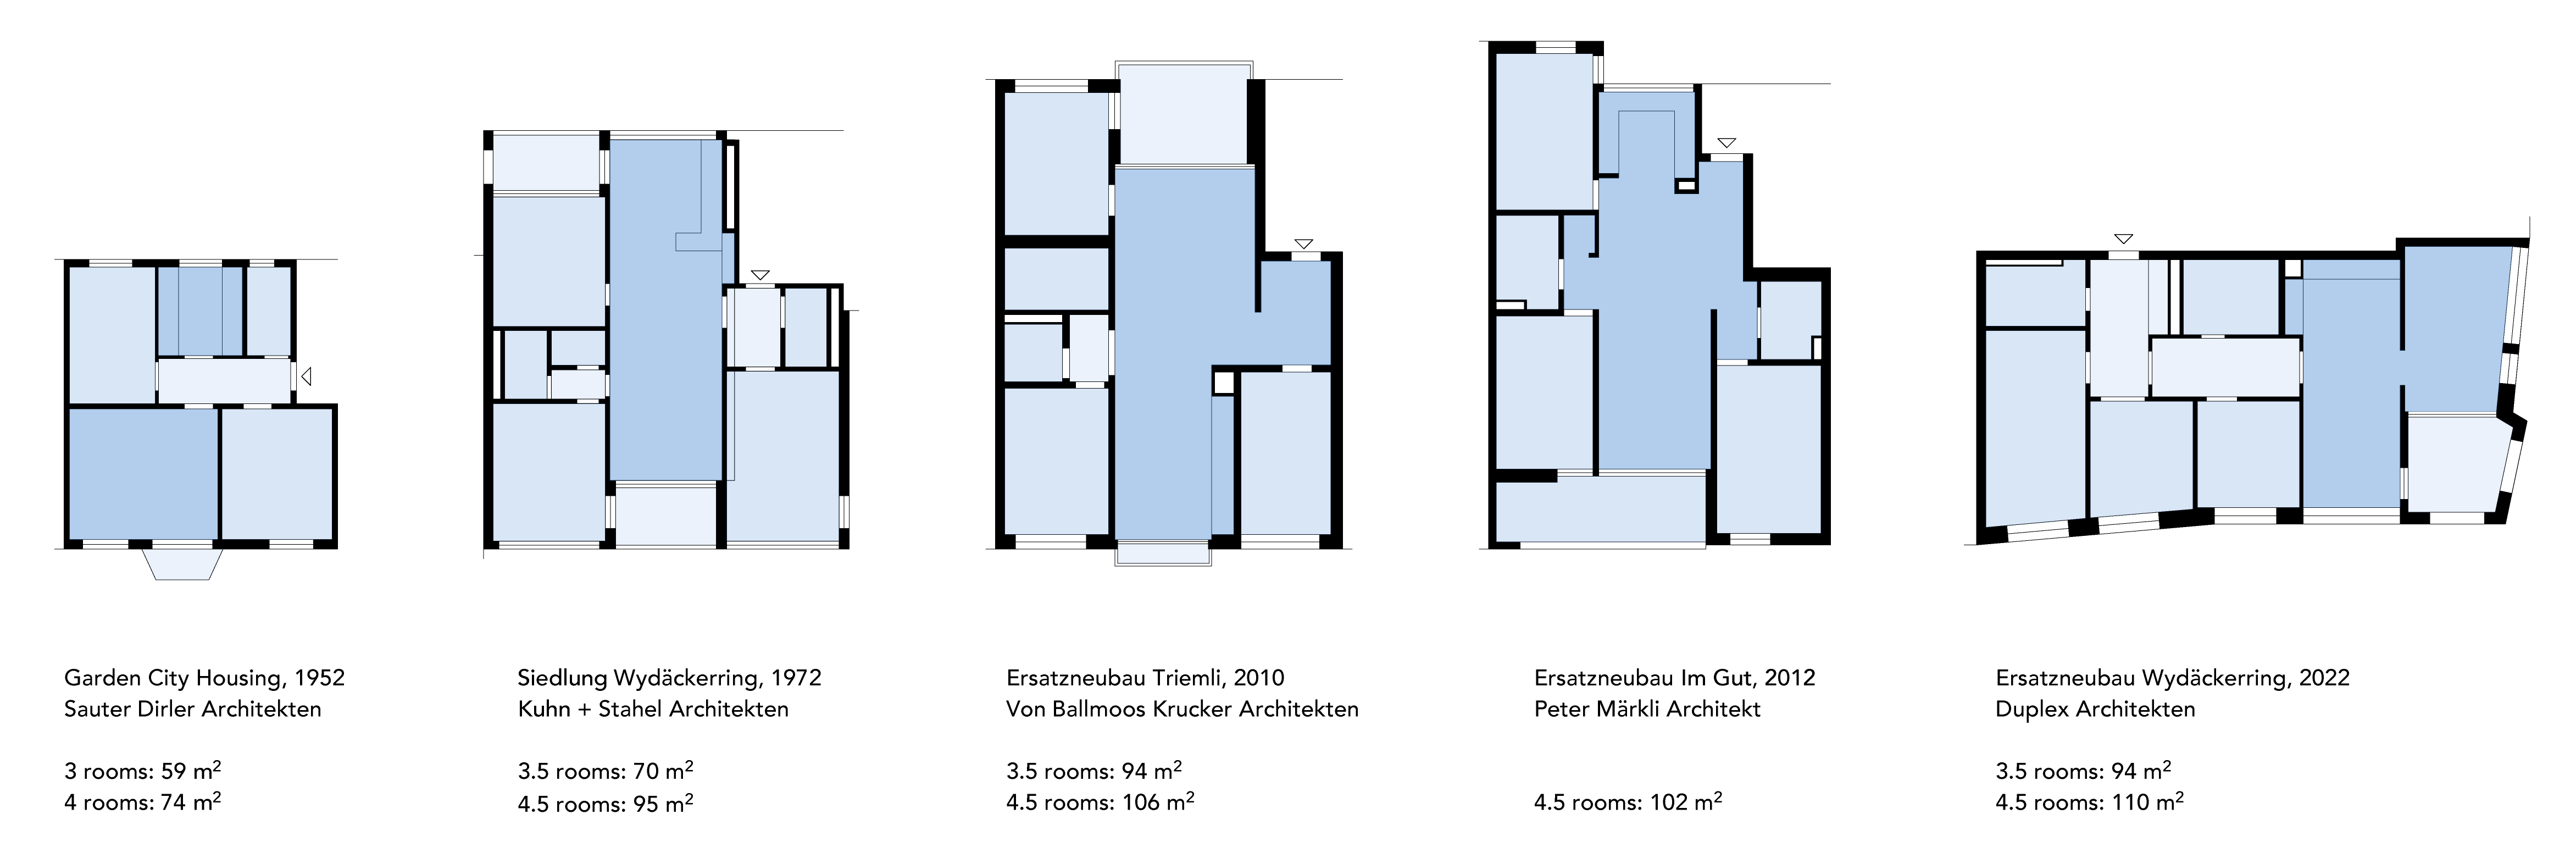 floorplans of the last 70 years compared